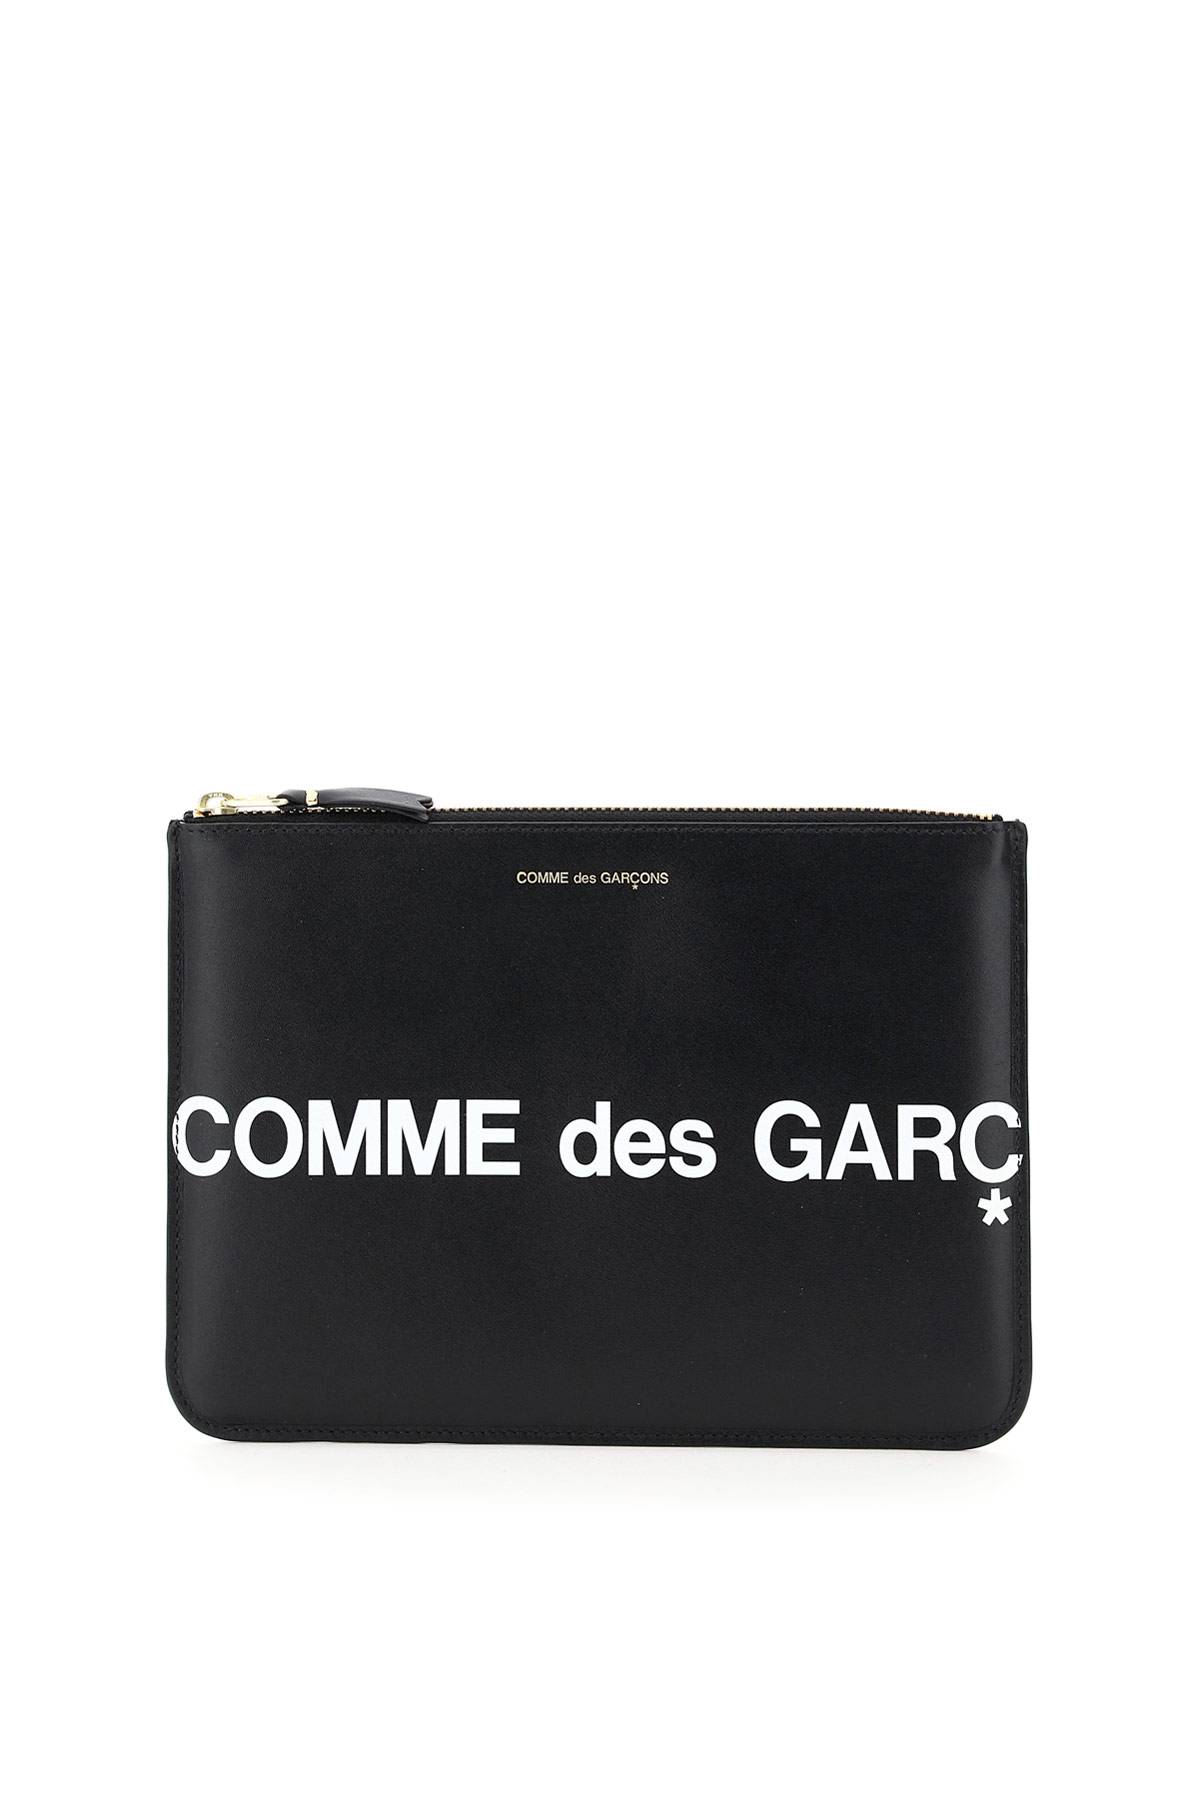 COMME DES GARCONS WALLET COMME DES GARCONS WALLET leather pouch with logo